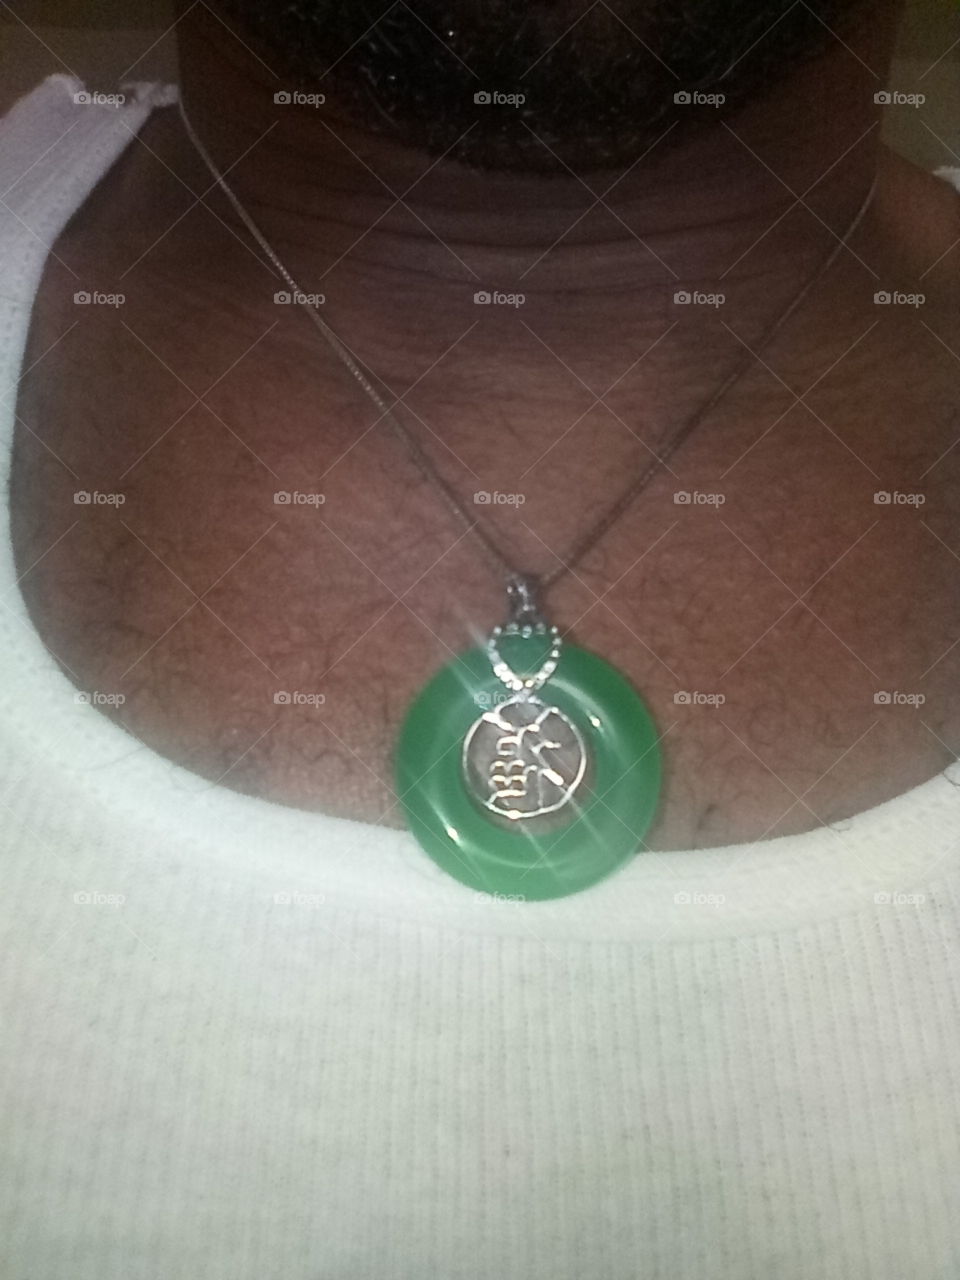 My 1st Jade lucky blessing amulet